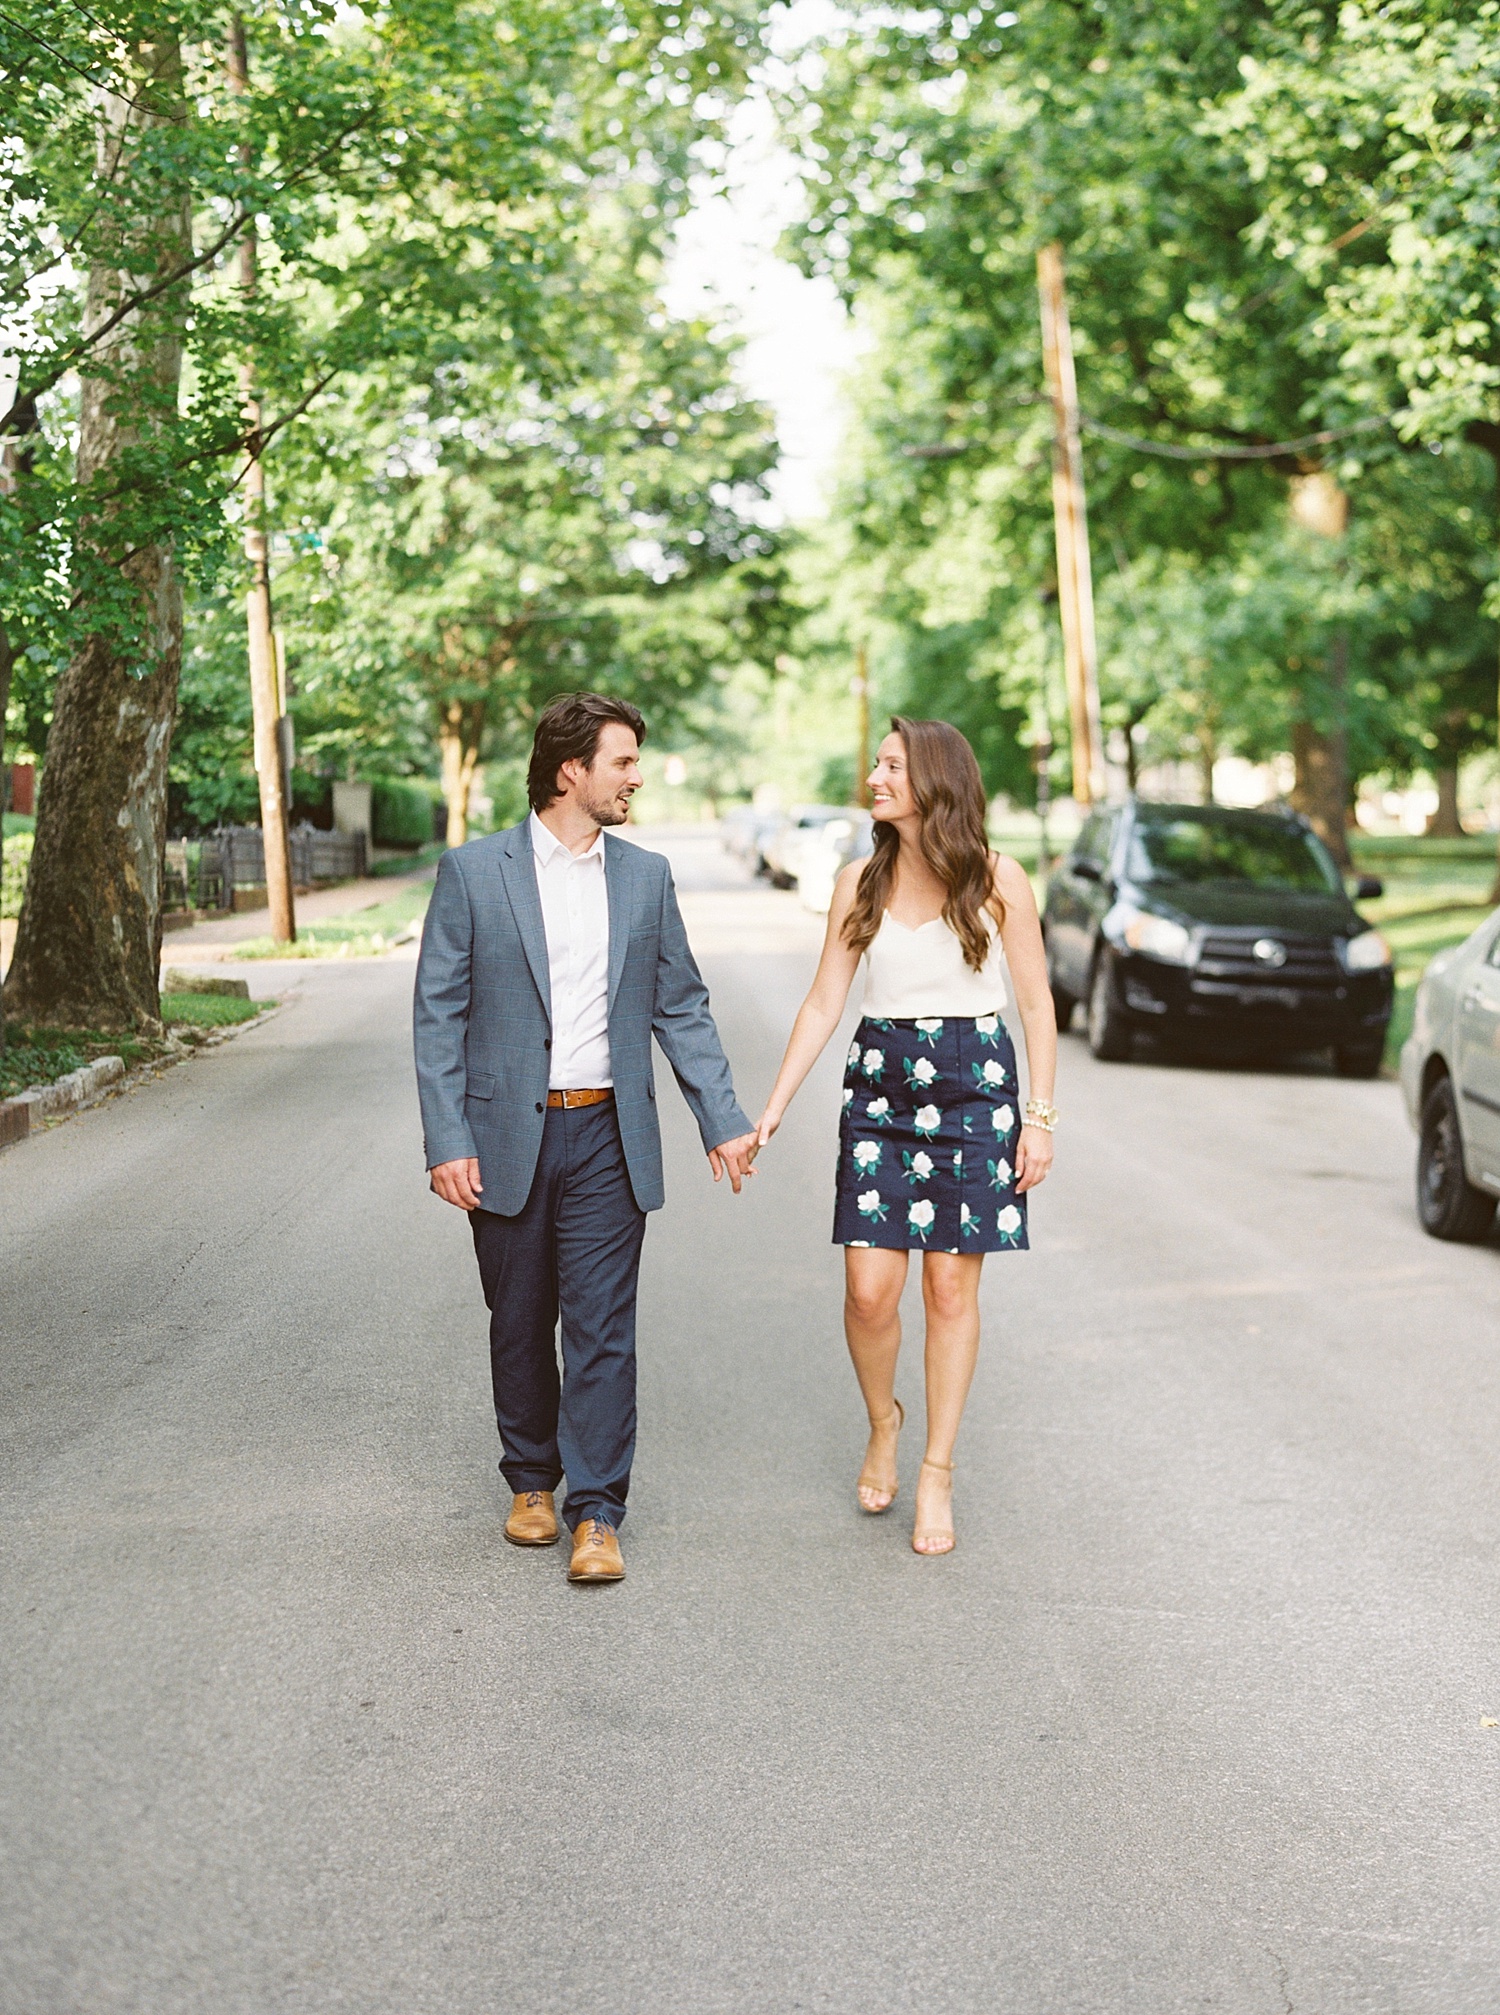 Downtown Lexington Engagement Session Talon Winery Picnic Engagement Session Gal Meets Glam Anthropologie Dress Laura Bodnar Photography Lexington Wedding Photographer Film Photography_0004-1.jpg